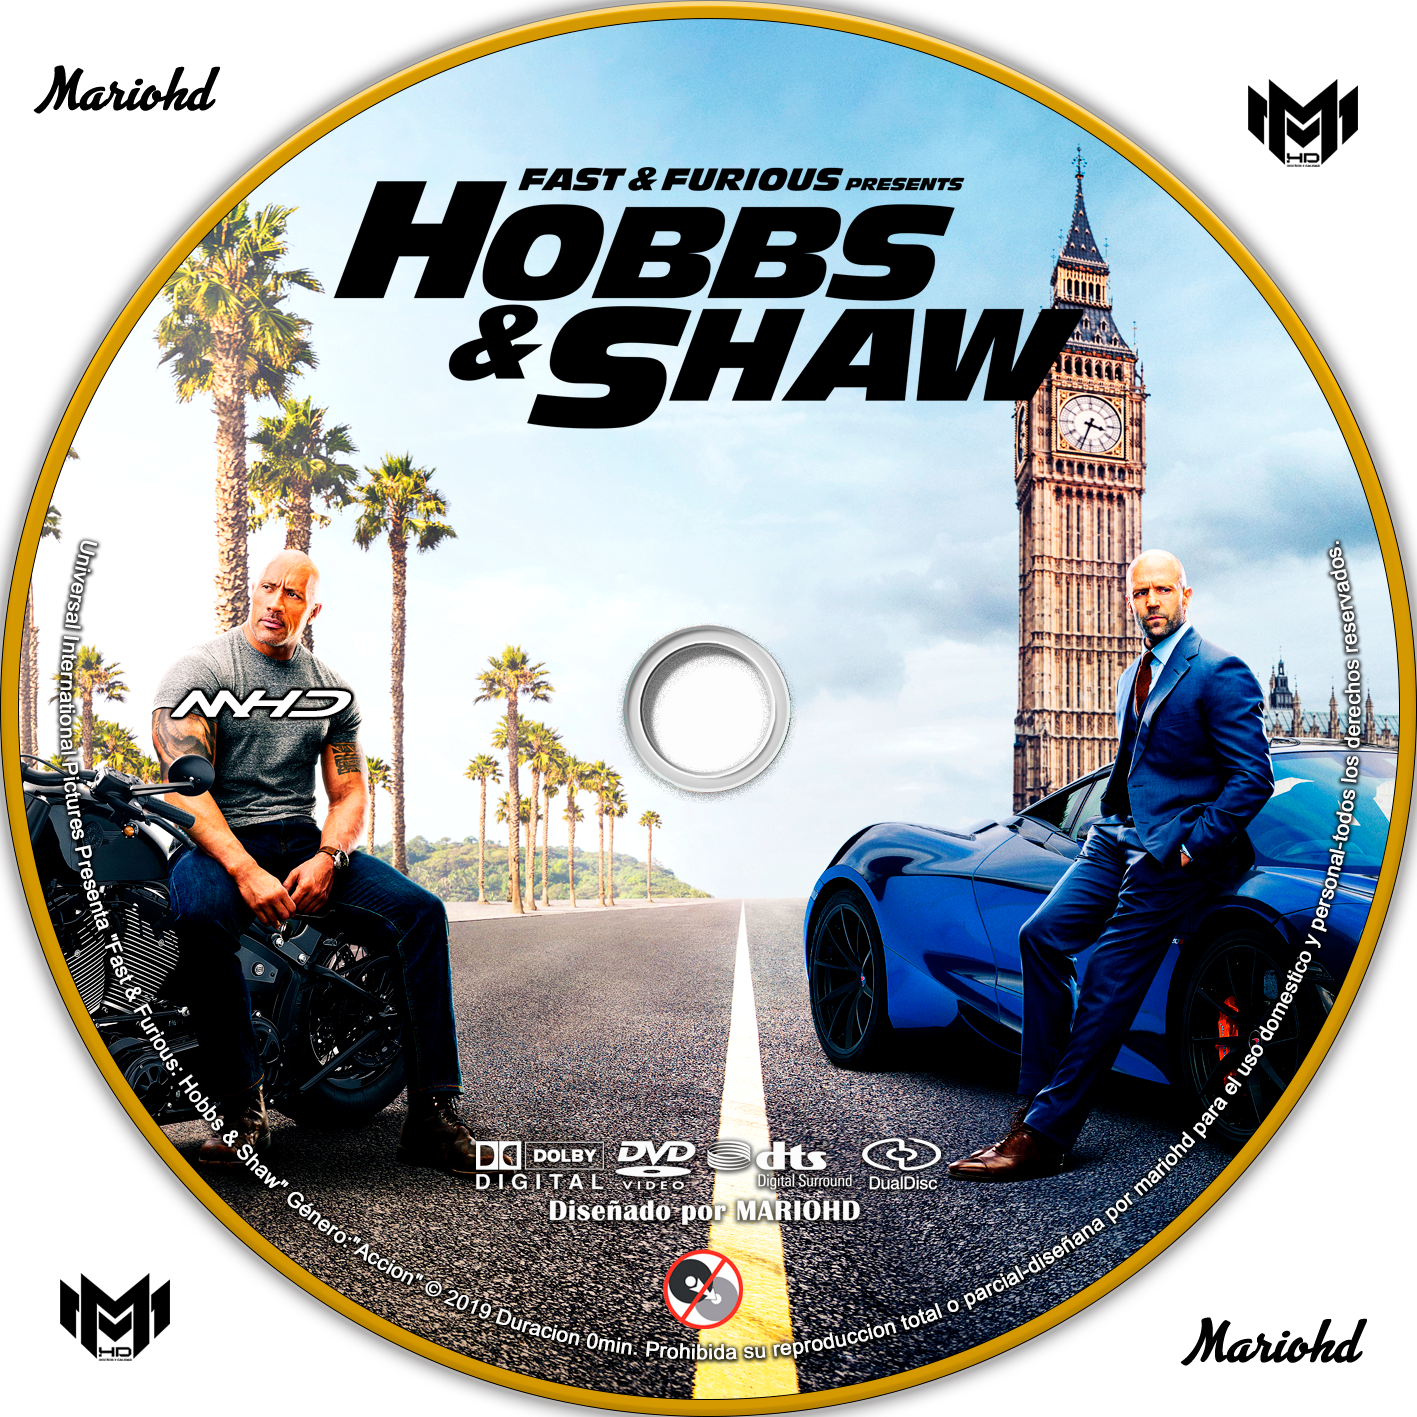 Hobbsand Shaw Fast Furious Spinoff D V D Cover PNG image